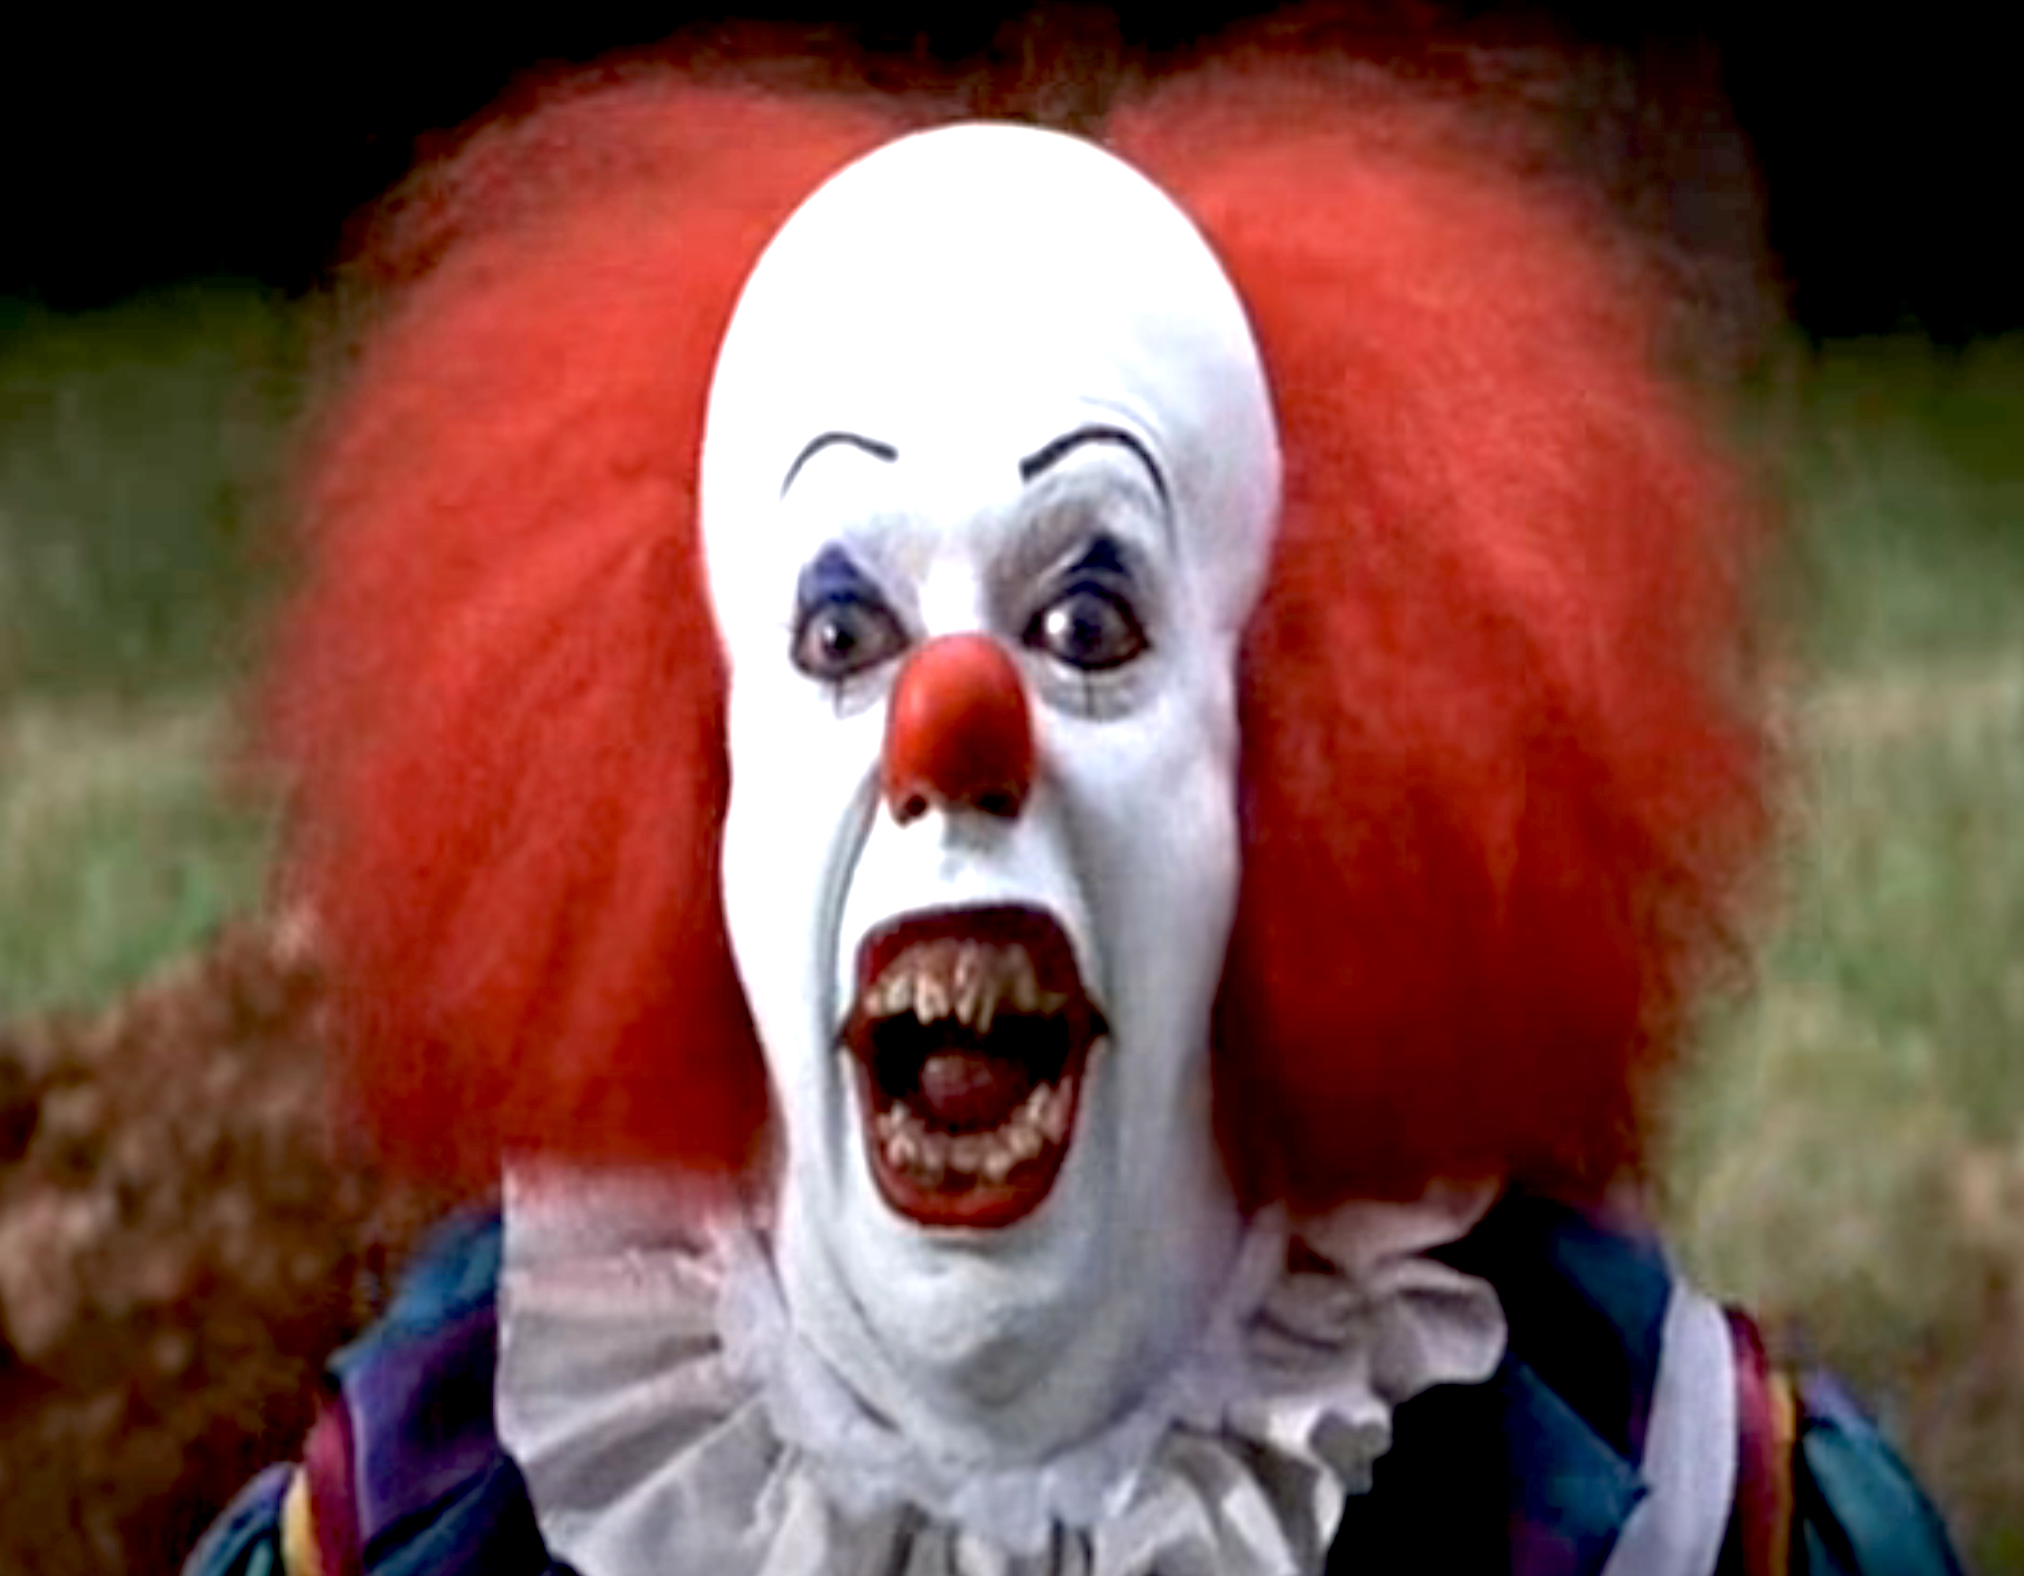 Pennywise baring his teeth